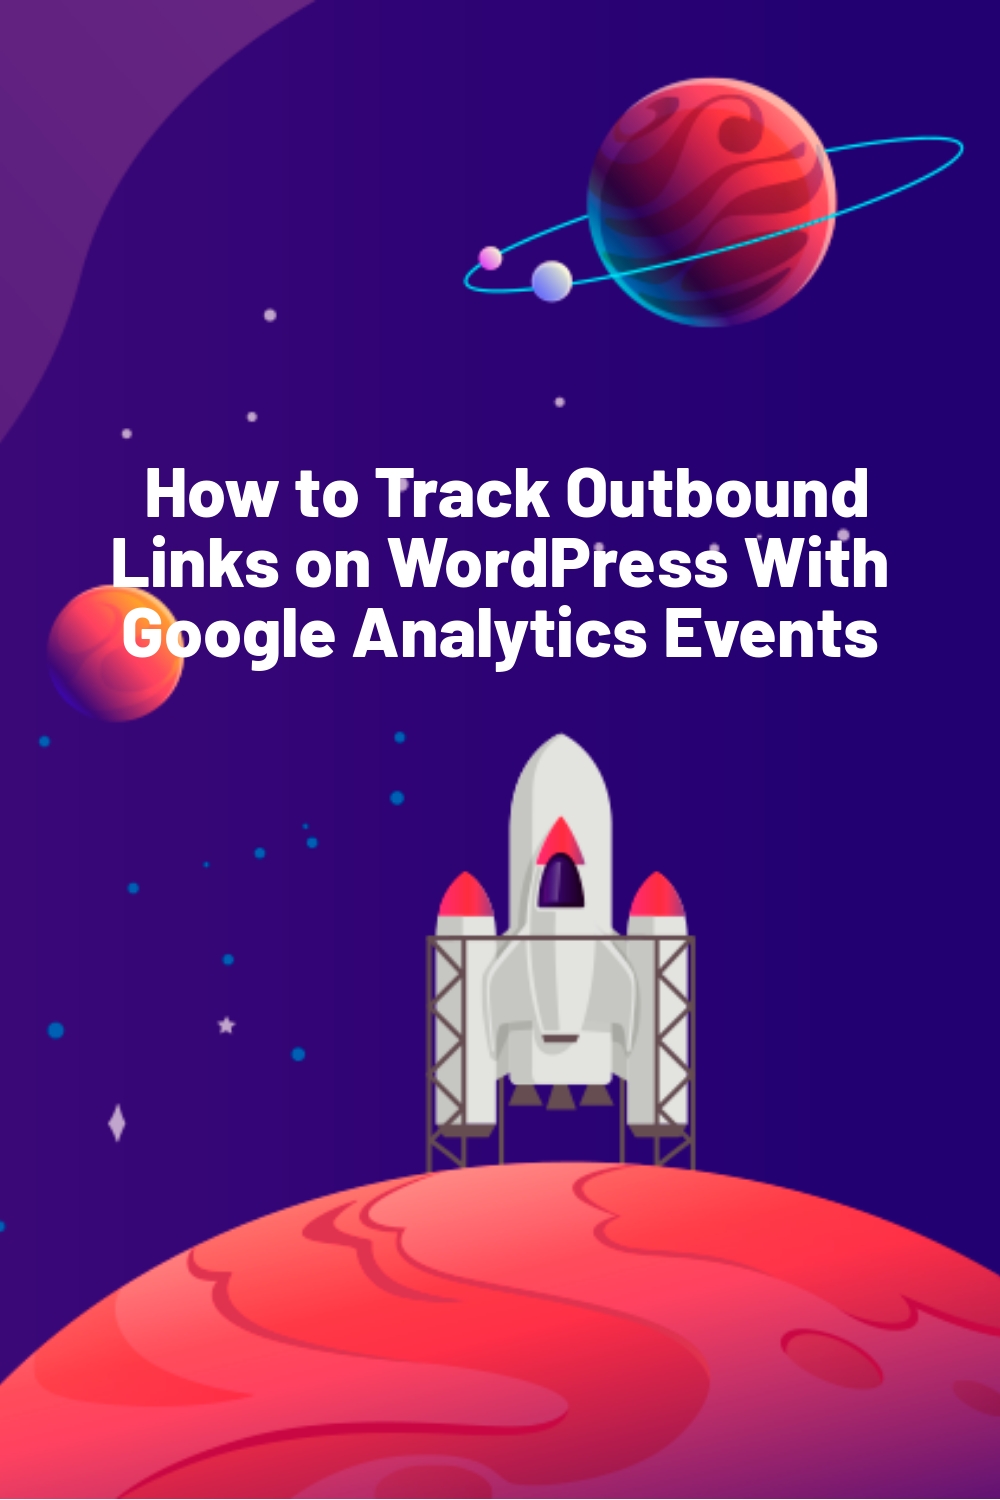  How to Track Outbound Links on WordPress With Google Analytics Events